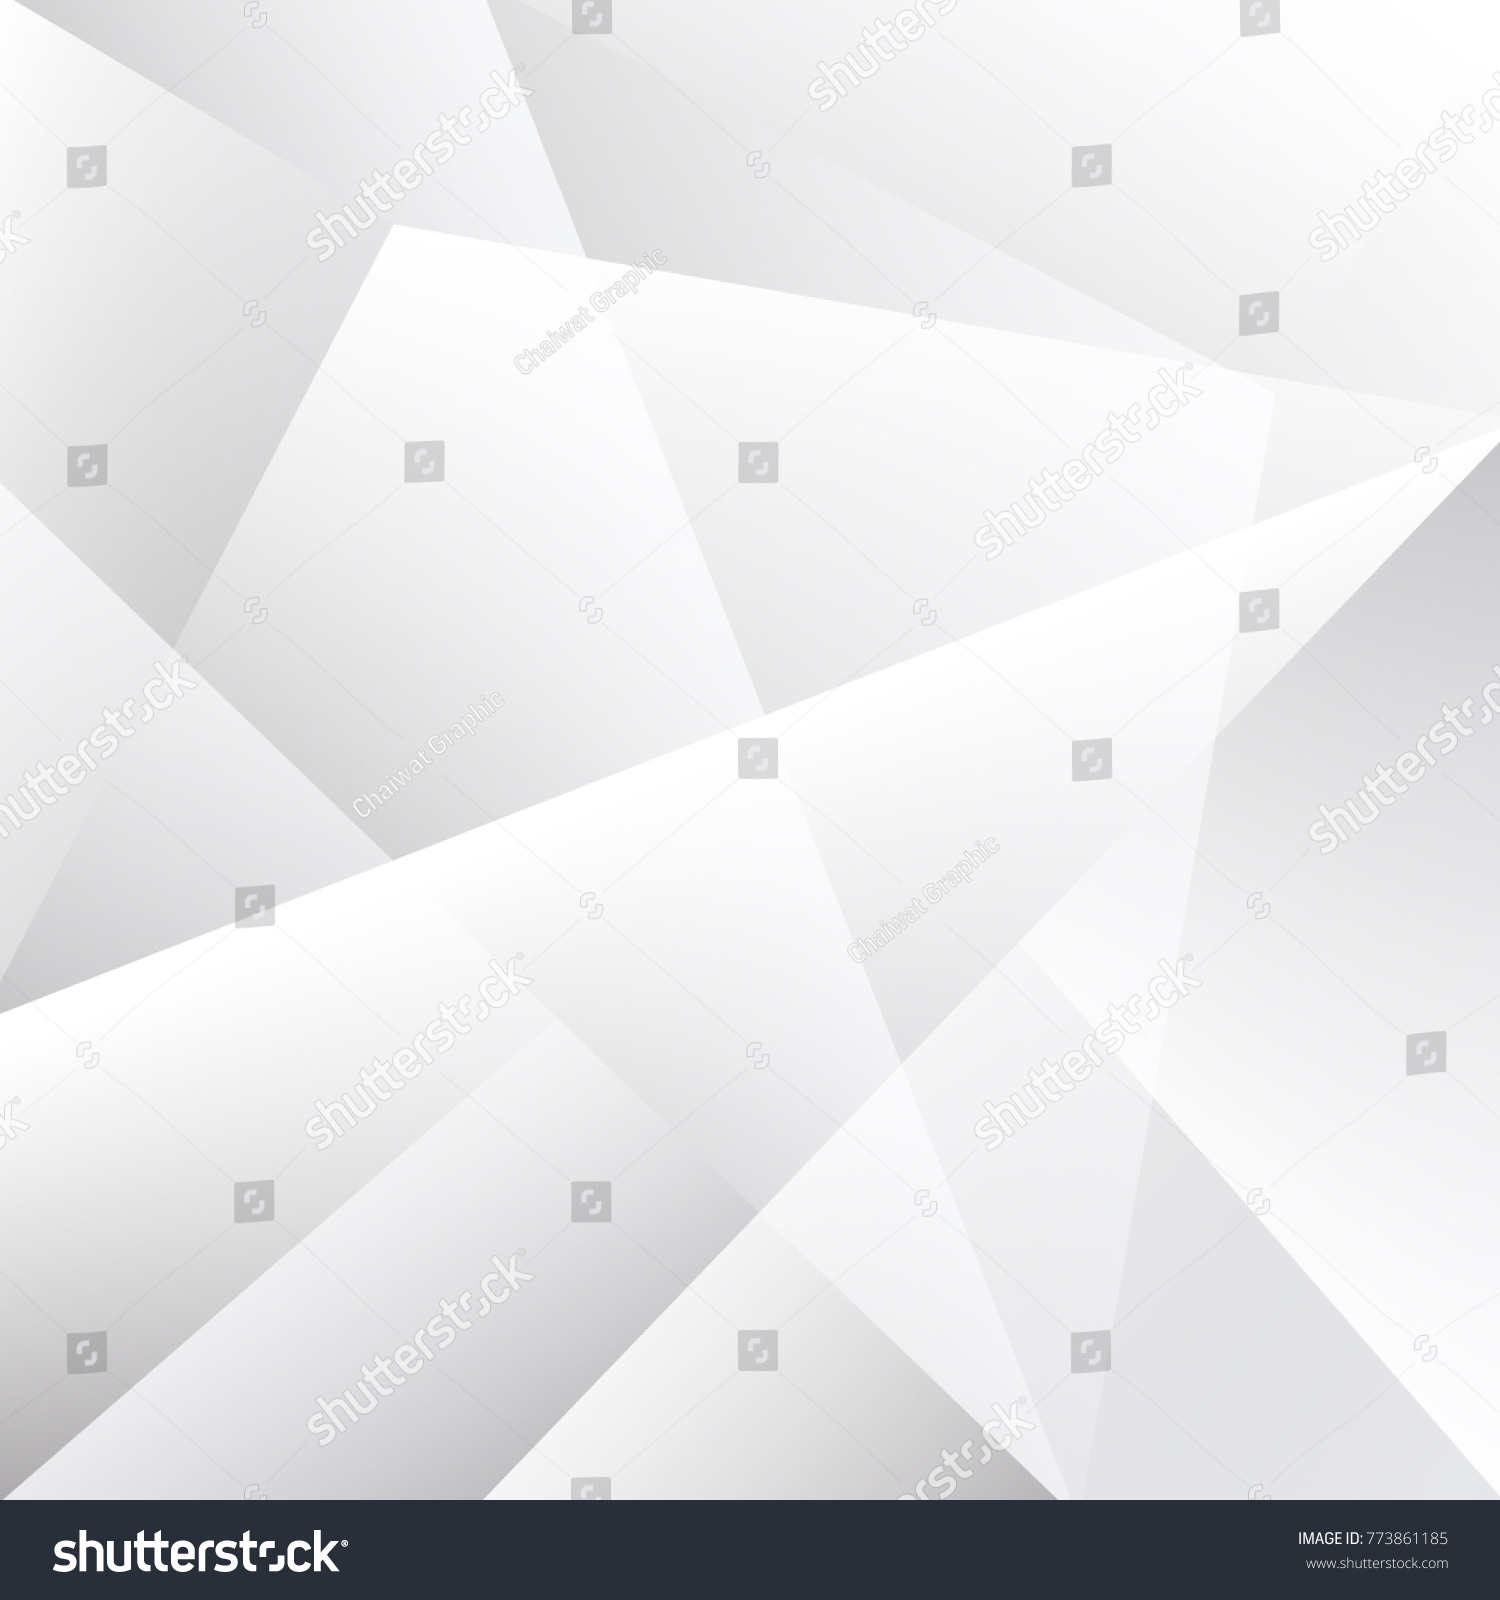 Abstract geometric white and gray with space modern design on Light gray silver background, vector illustration #773861185